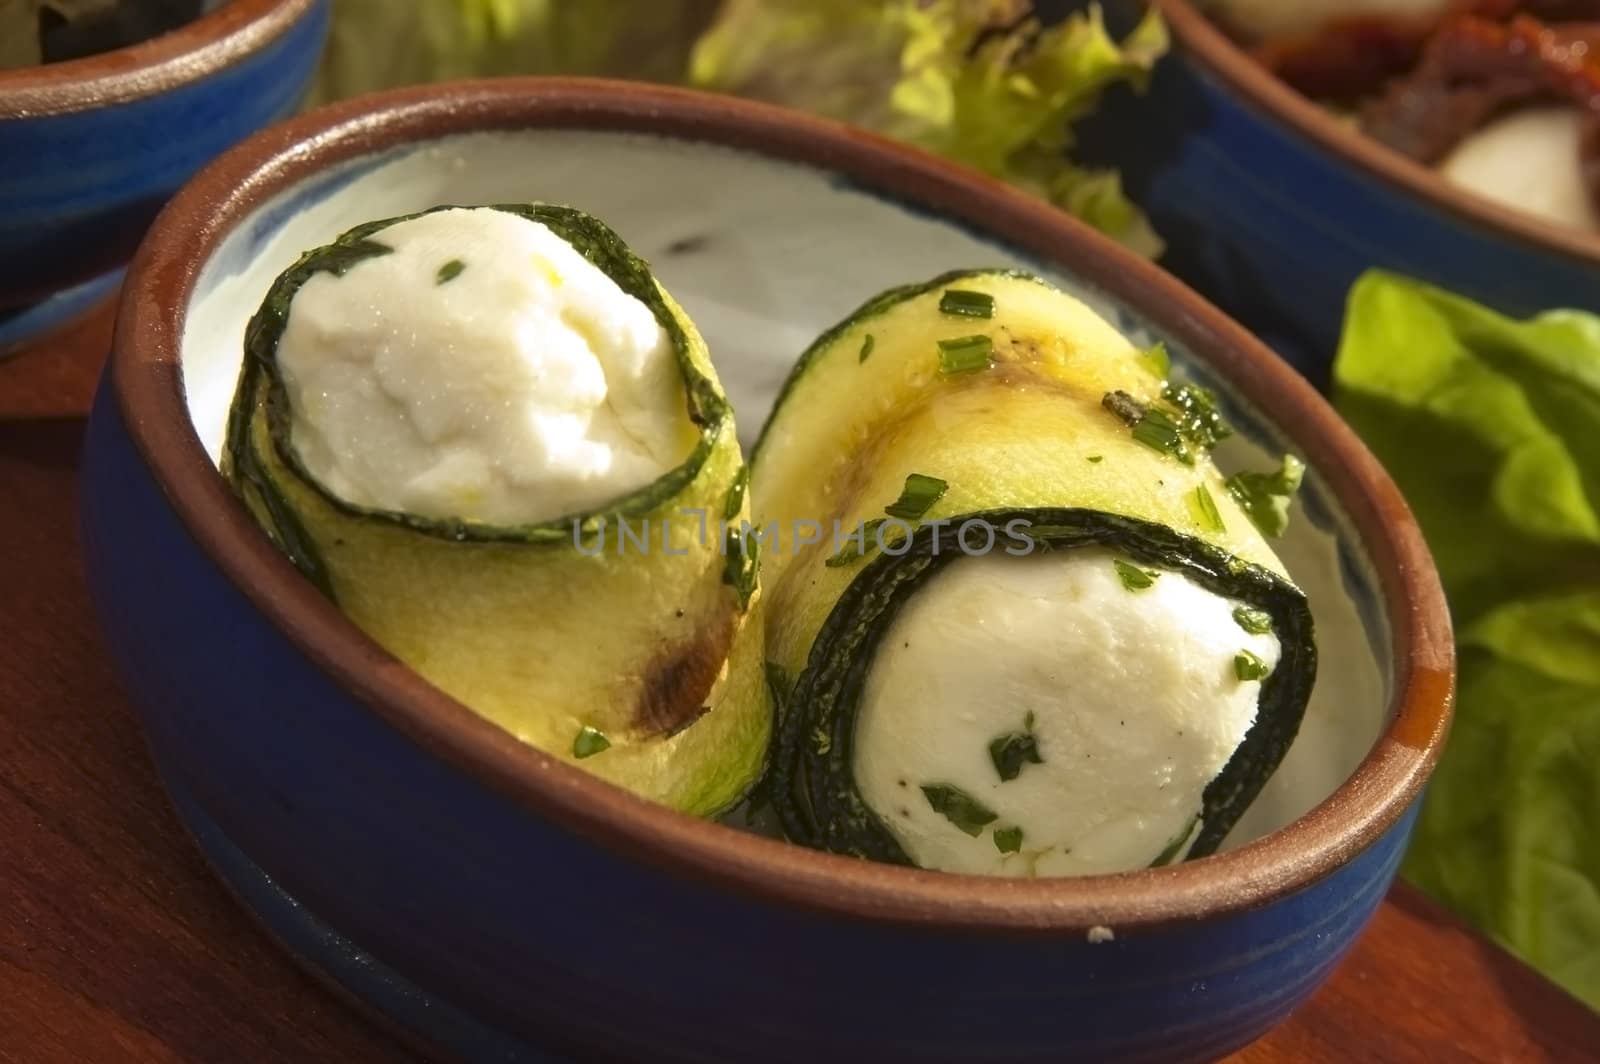 Courgette filled by the fetta cheese